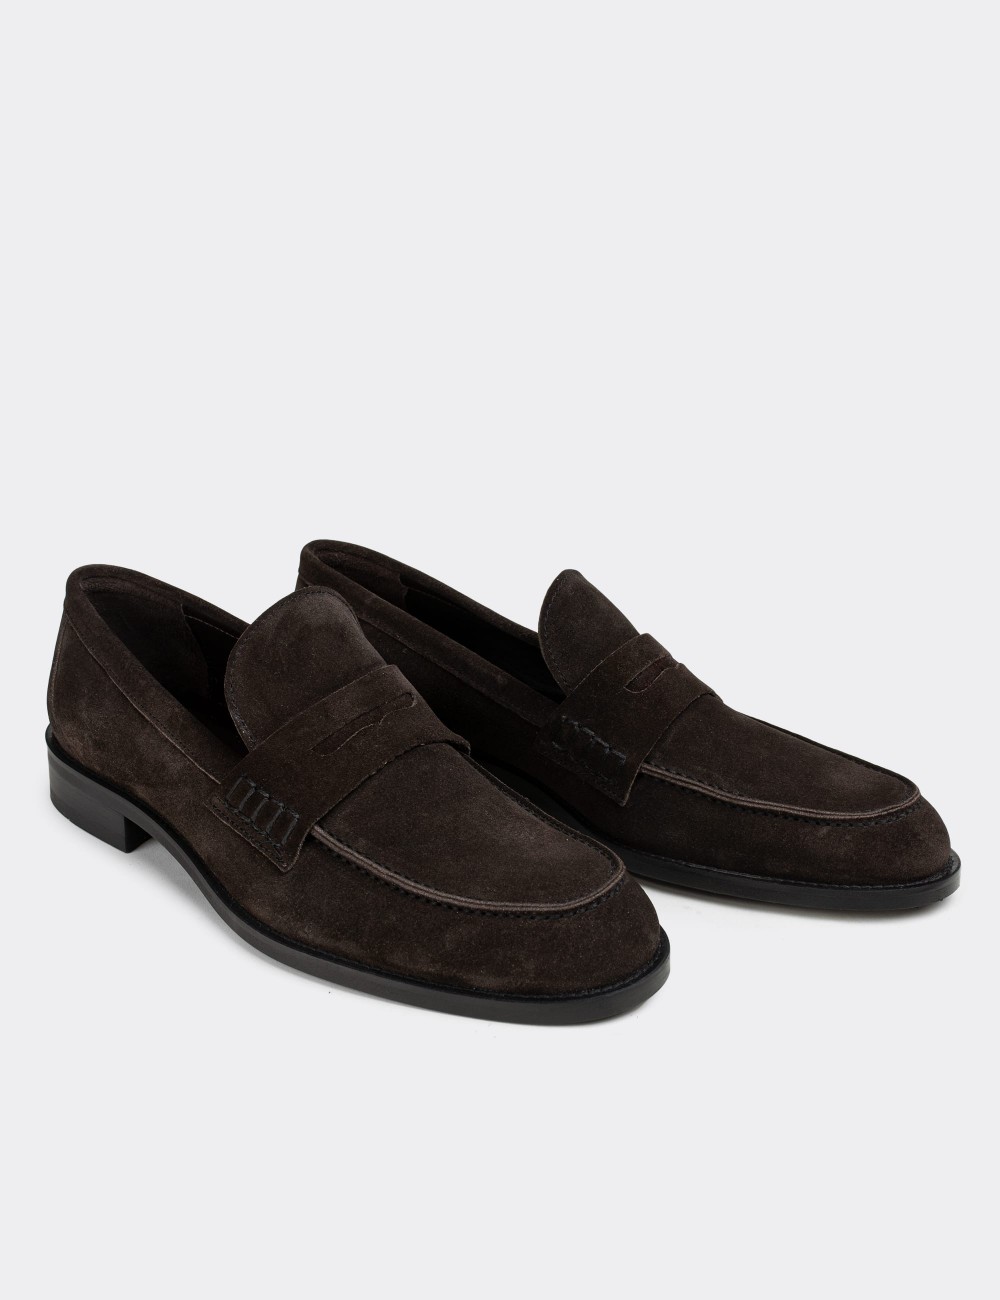 Brown Suede Leather Loafers - 01538MKHVN08